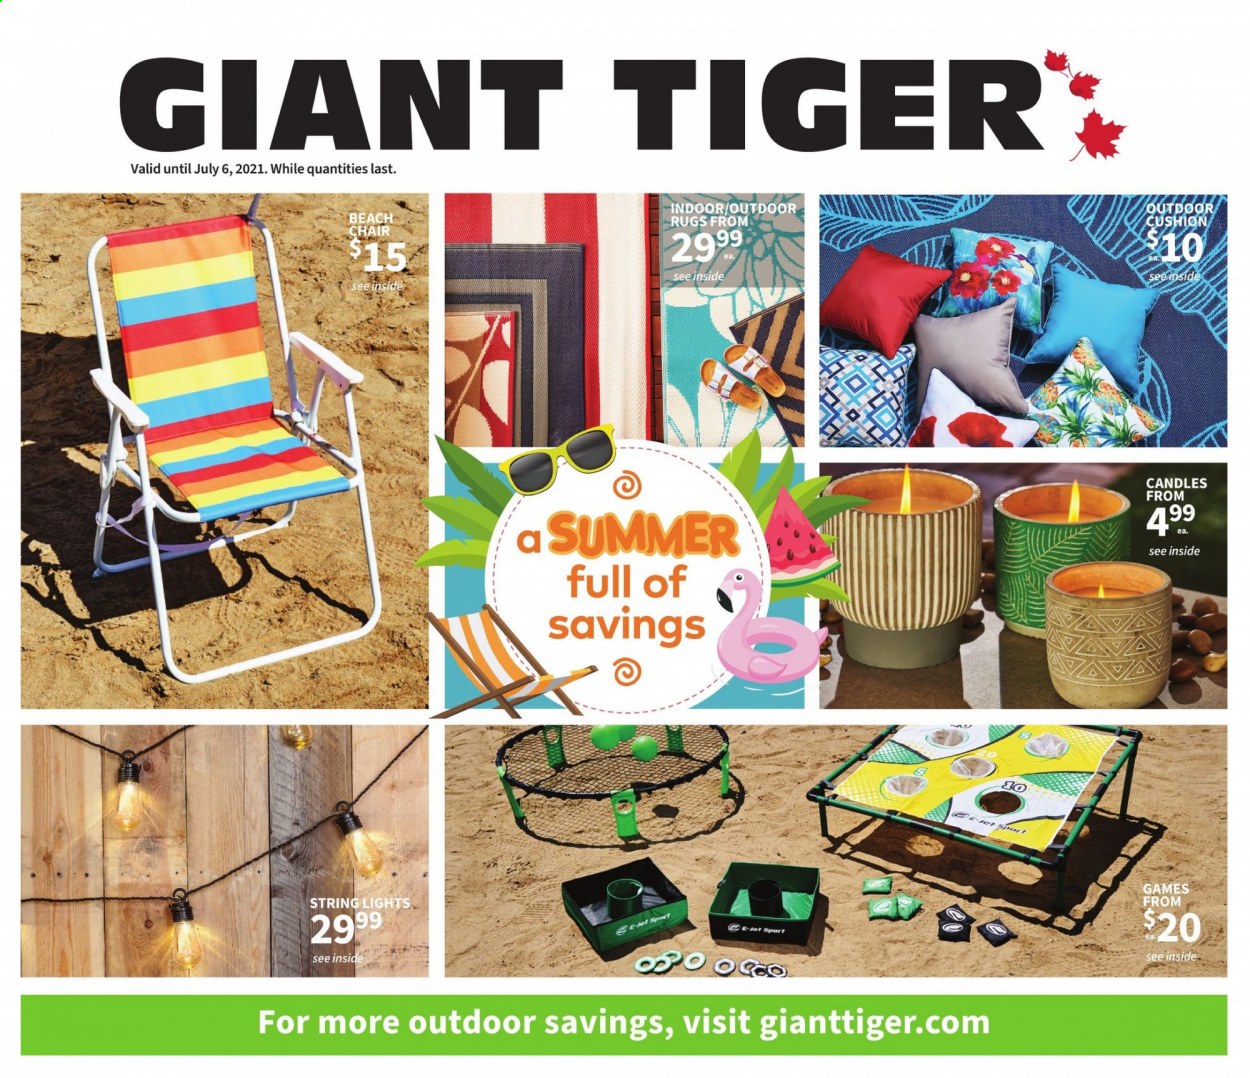 thumbnail - Giant Tiger Flyer - June 23, 2021 - July 06, 2021 - Sales products - candle, cushion, chair, beach chair, string lights, rug. Page 1.